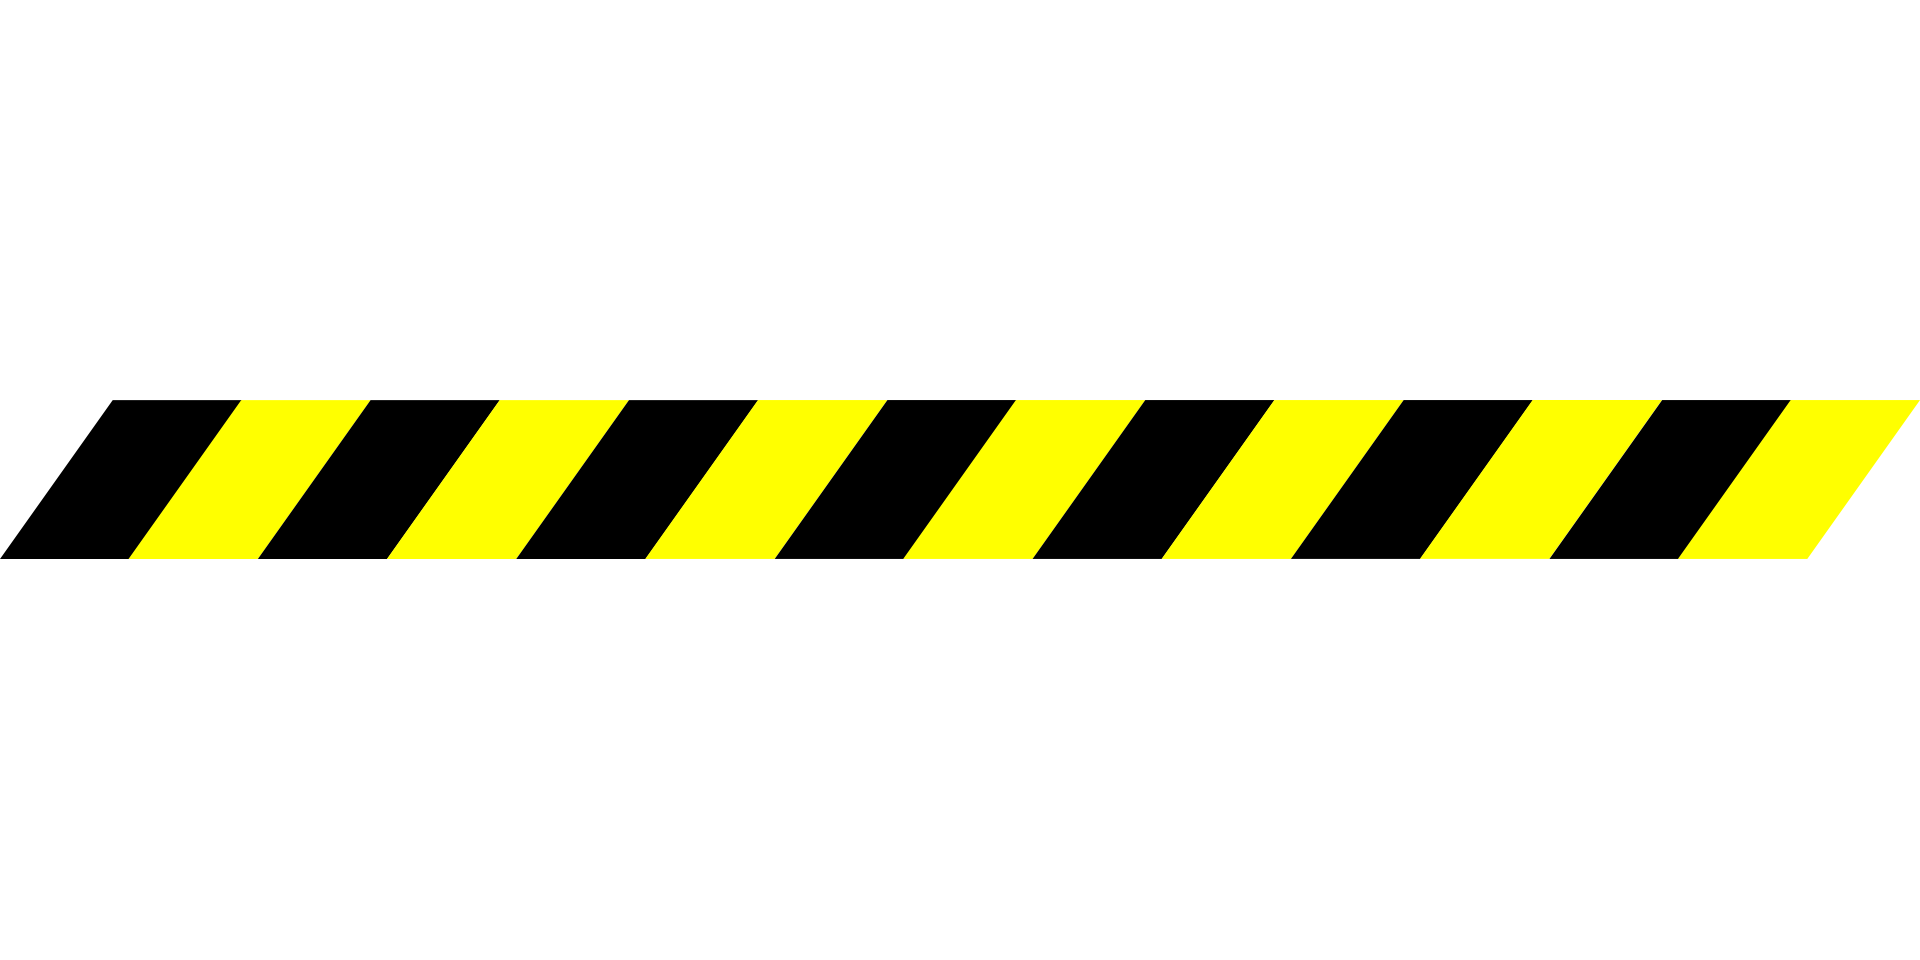 caution clipart police tape